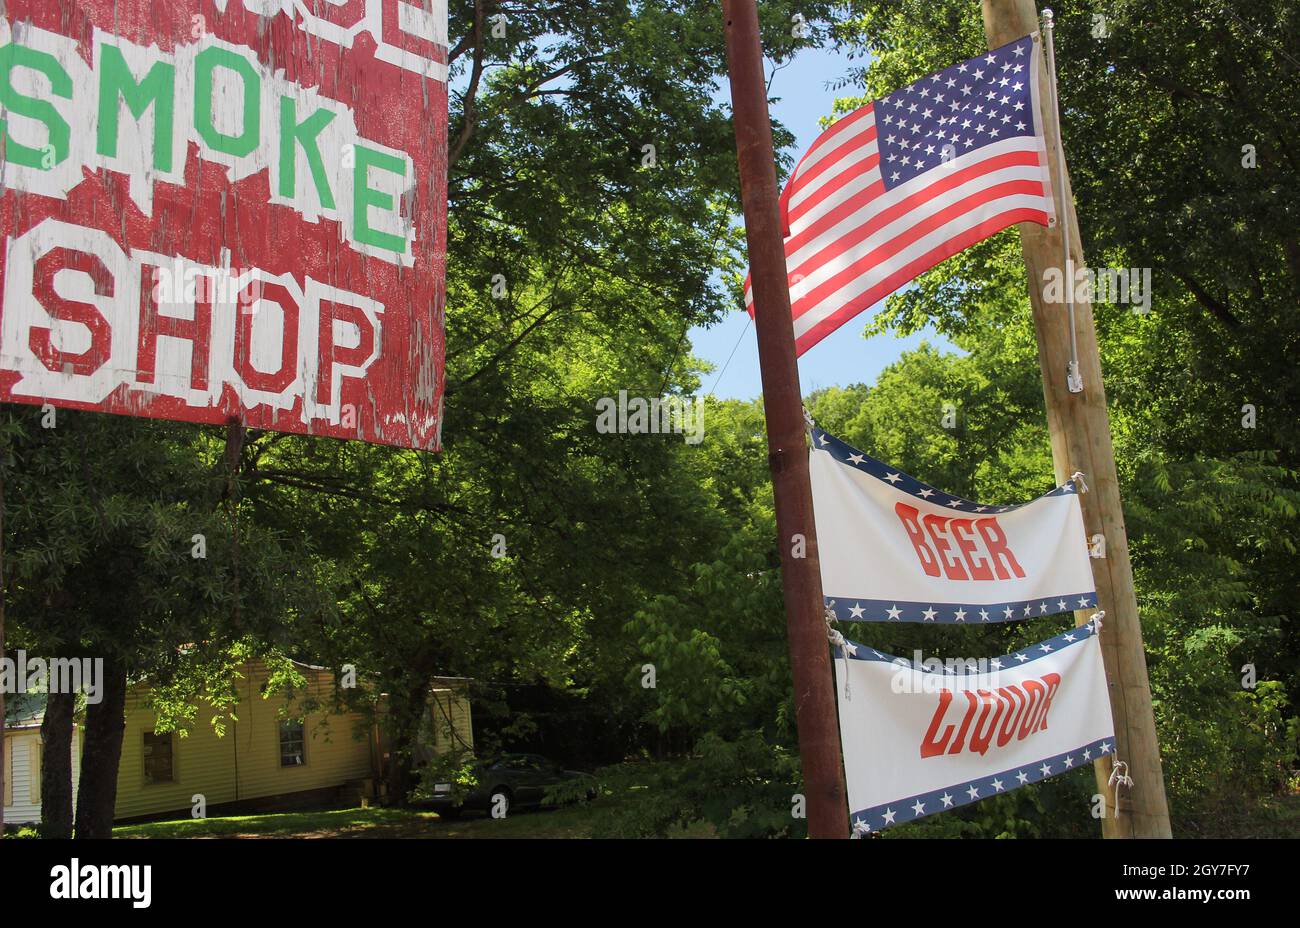 Smoke Shop Sign Next to Beer and Liquor sign with American Flag. Rural Texas Scenery. Small Town Texas Stock Photo